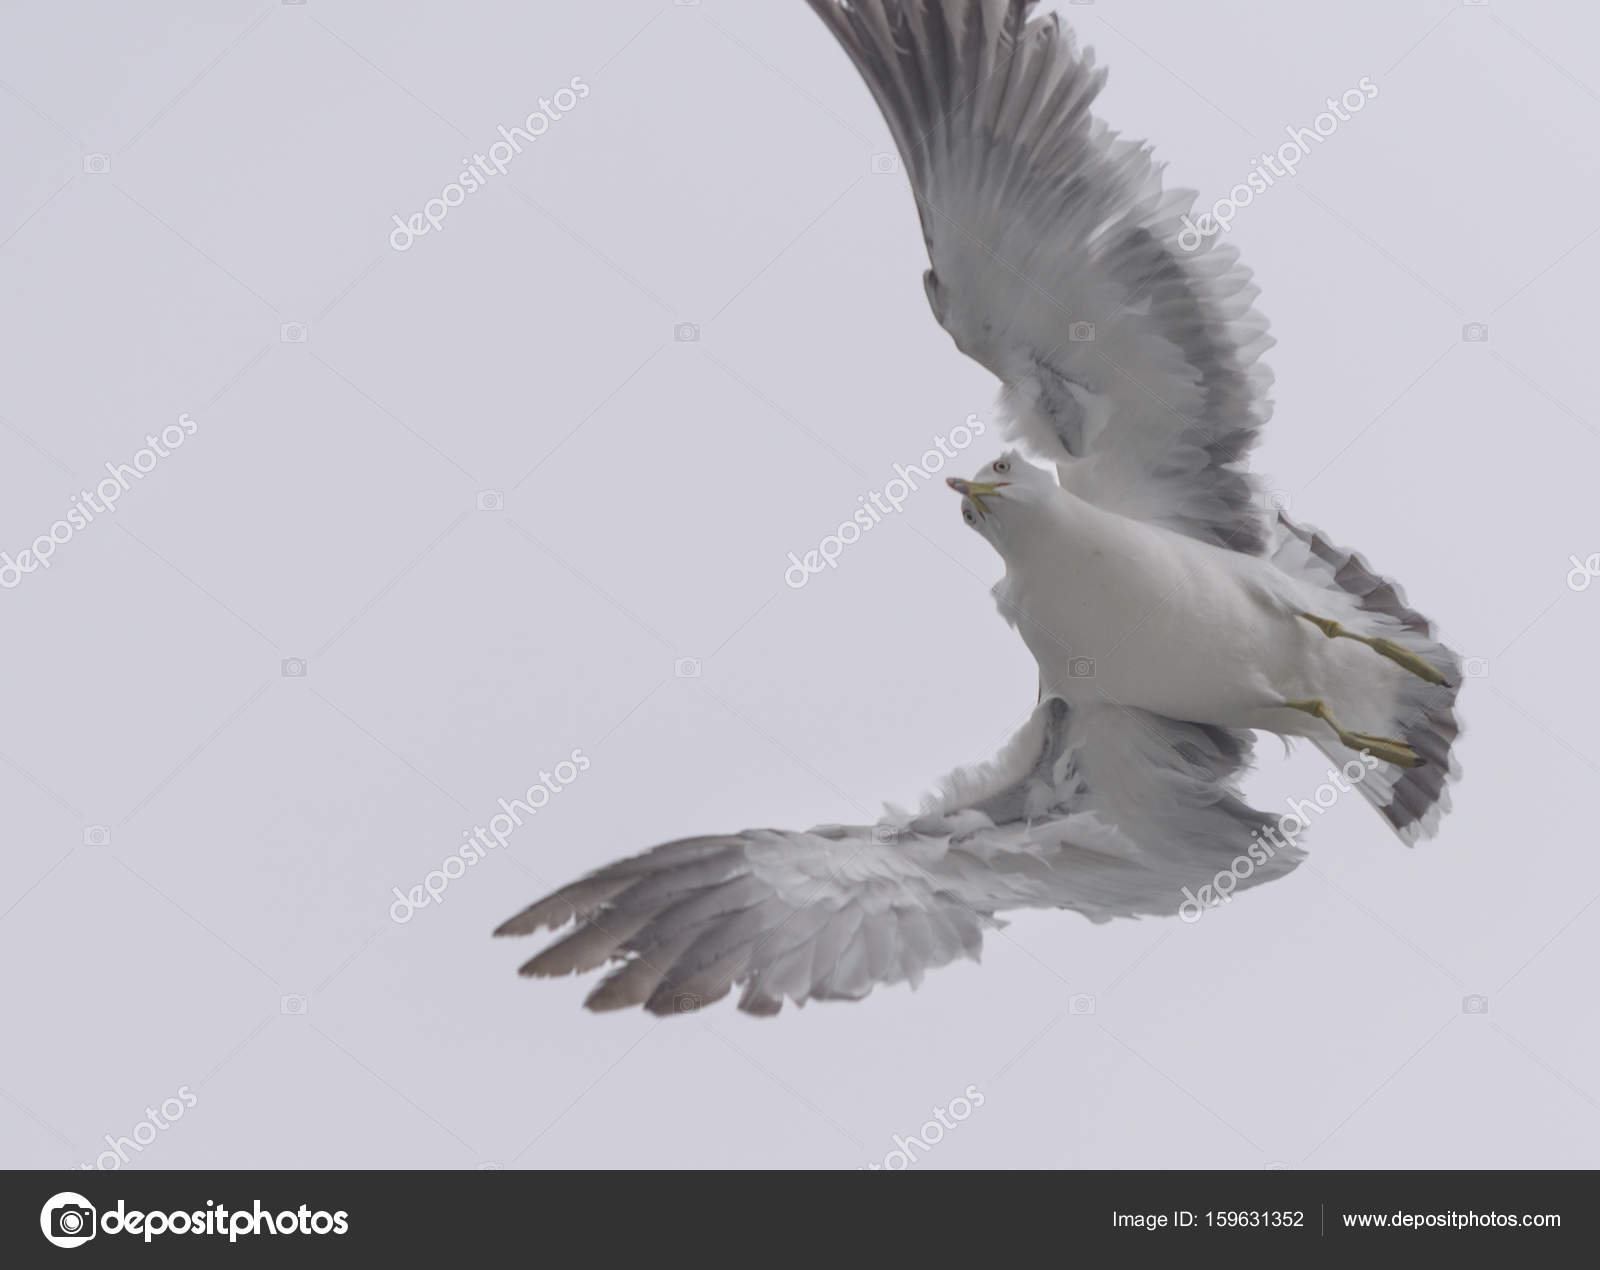 Flying seagull in the sky. — Stock Photo © eevl #159631352